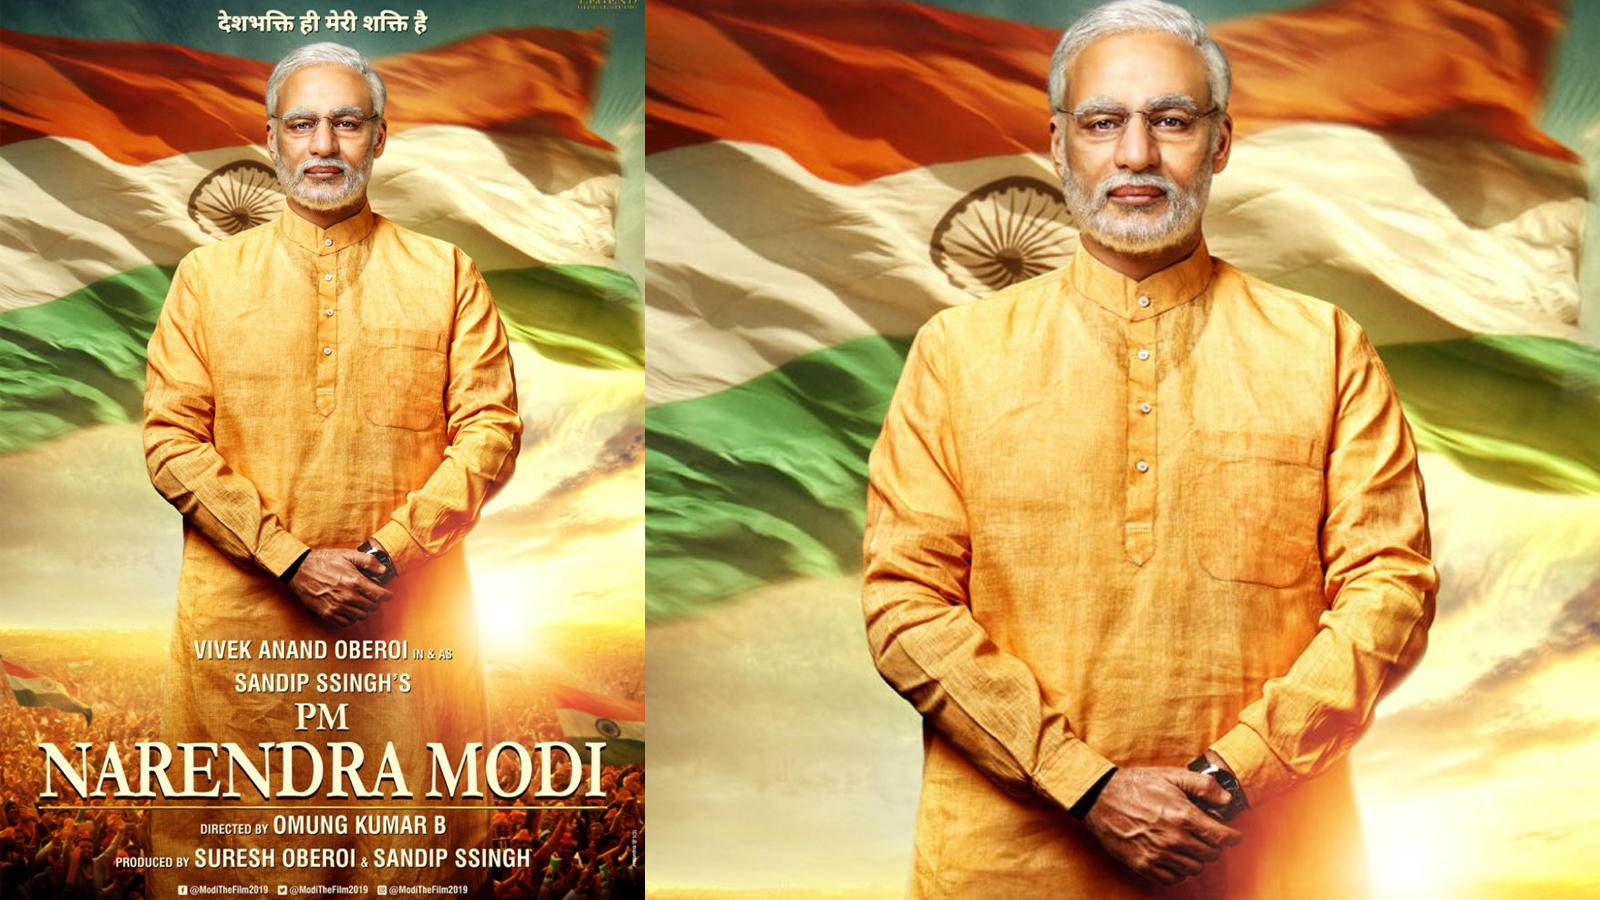 PM Narendra Modi Biopic Trailer Is Out: Vivek Oberoi Tries Playing Prime Minister's Role